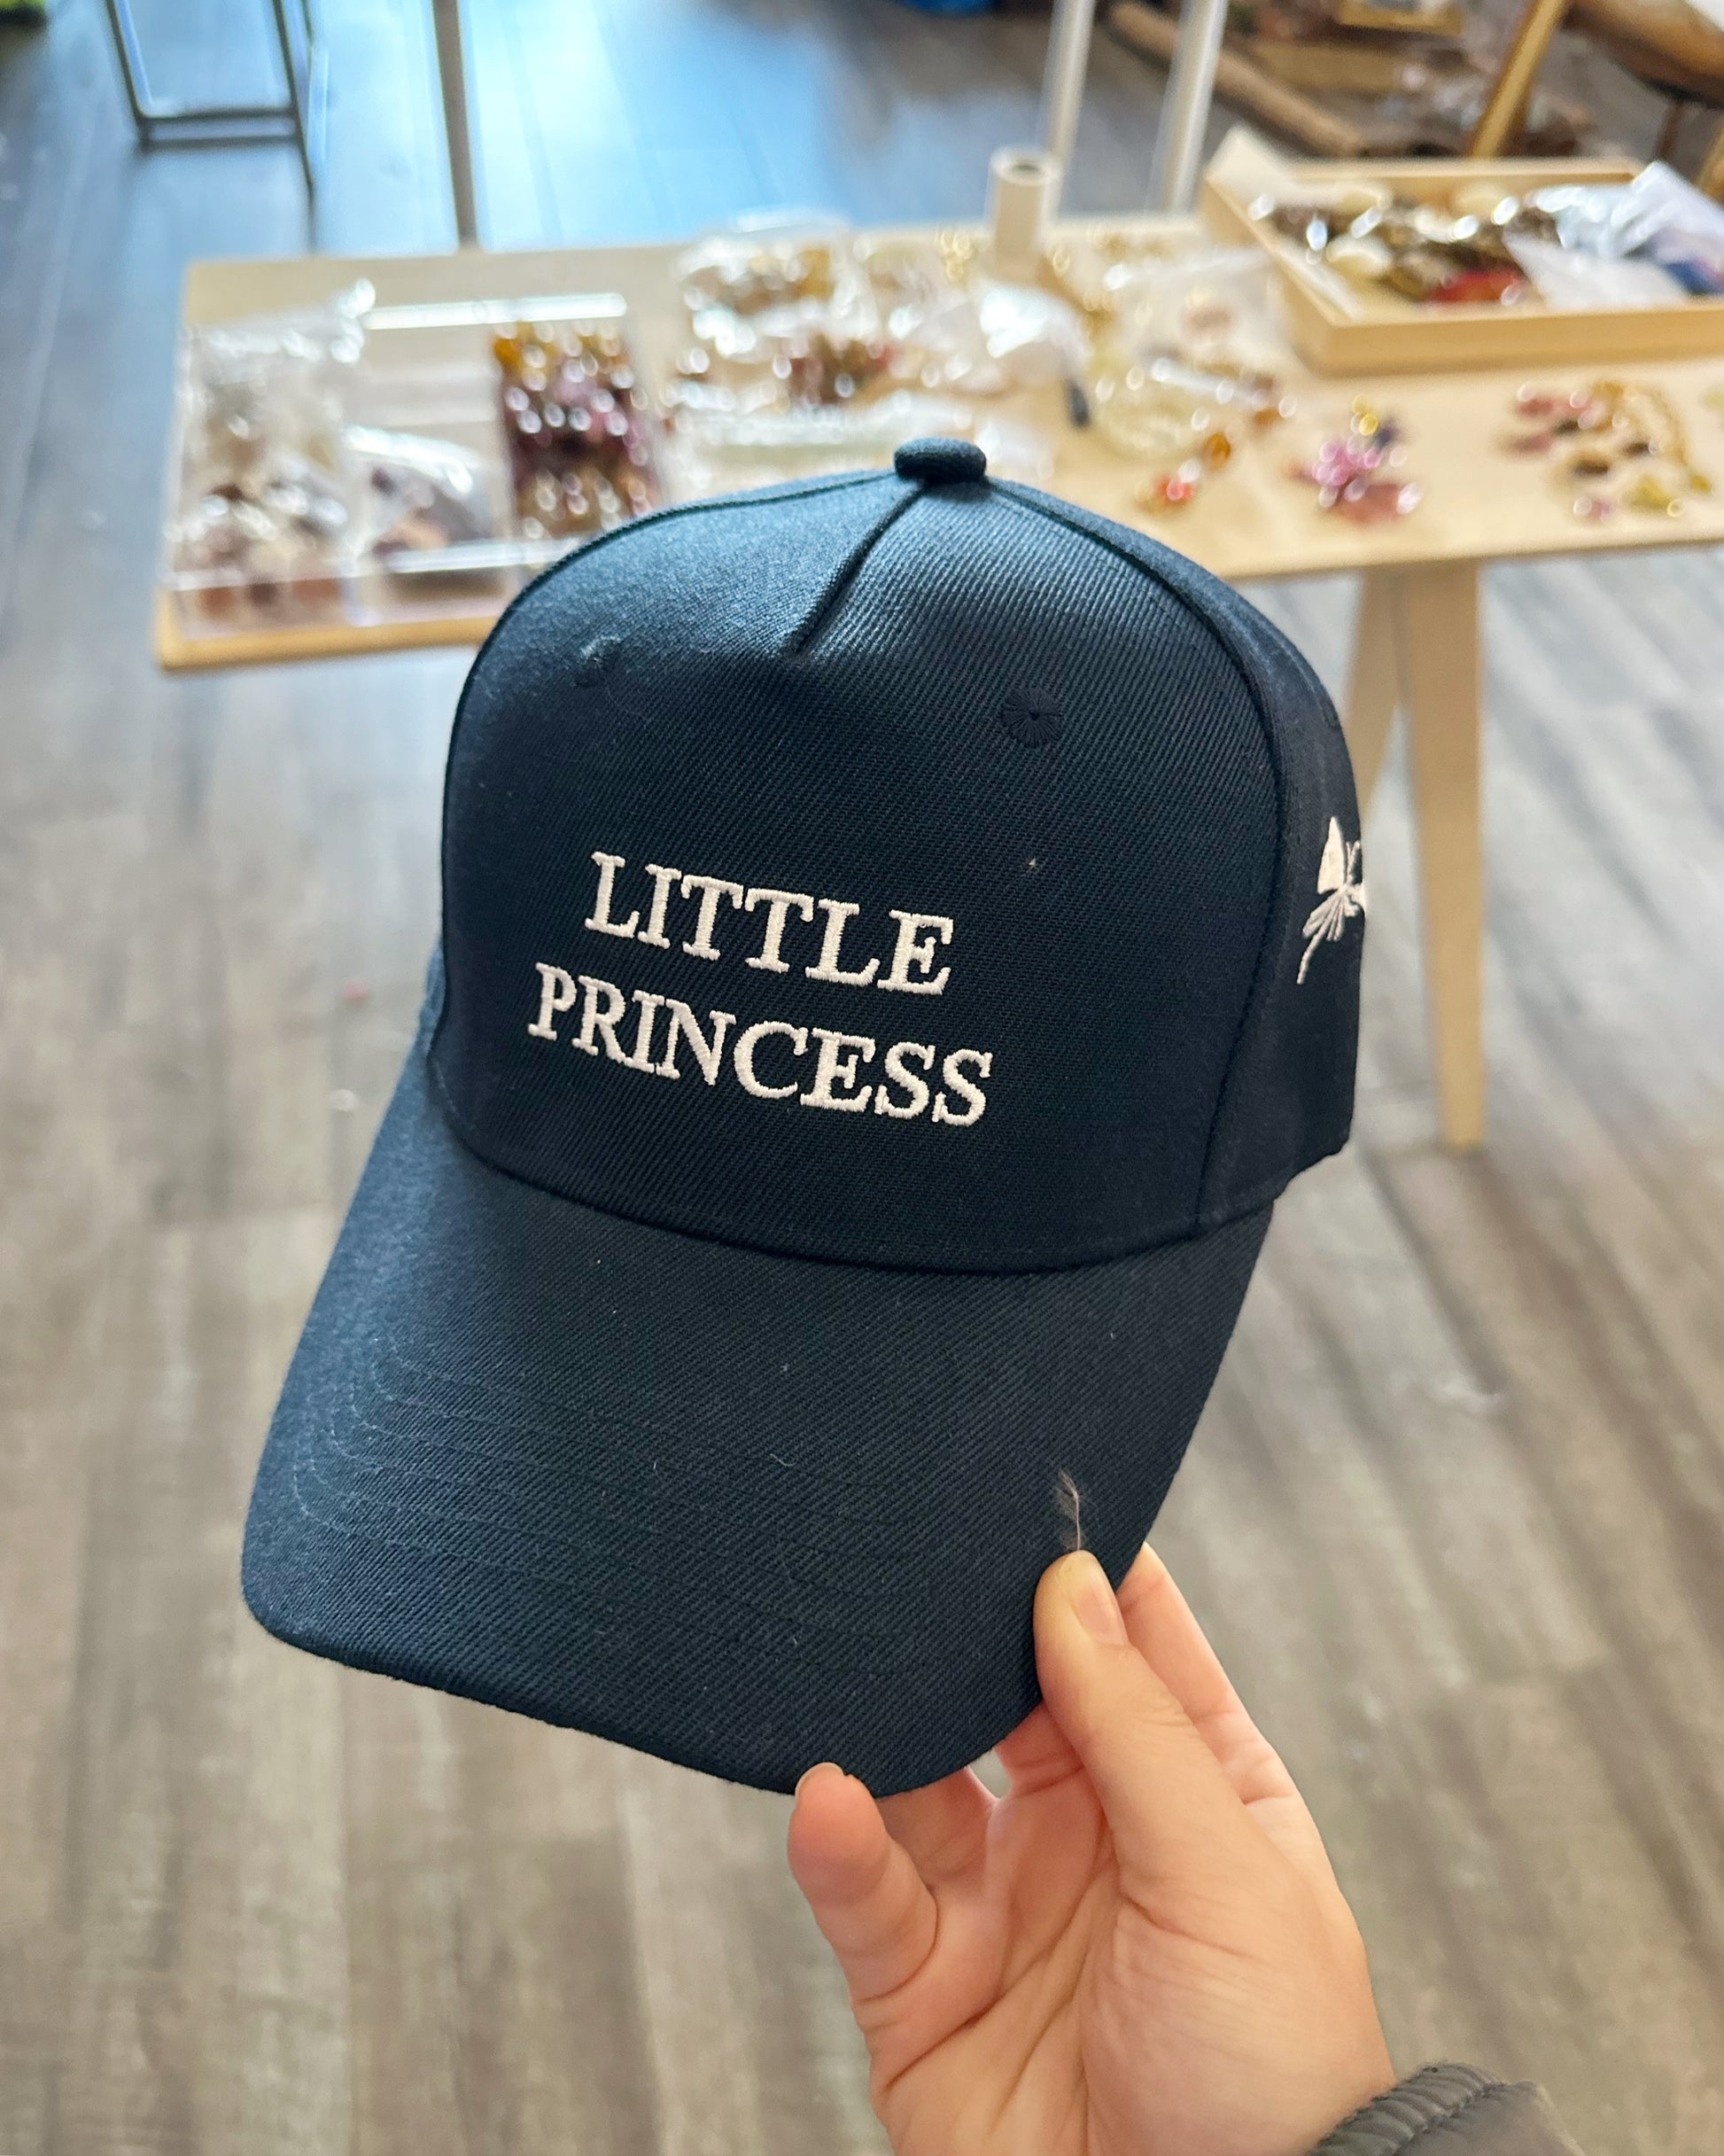 Navy blue cap with the words "Little Princess" embroidered on it in white thread.